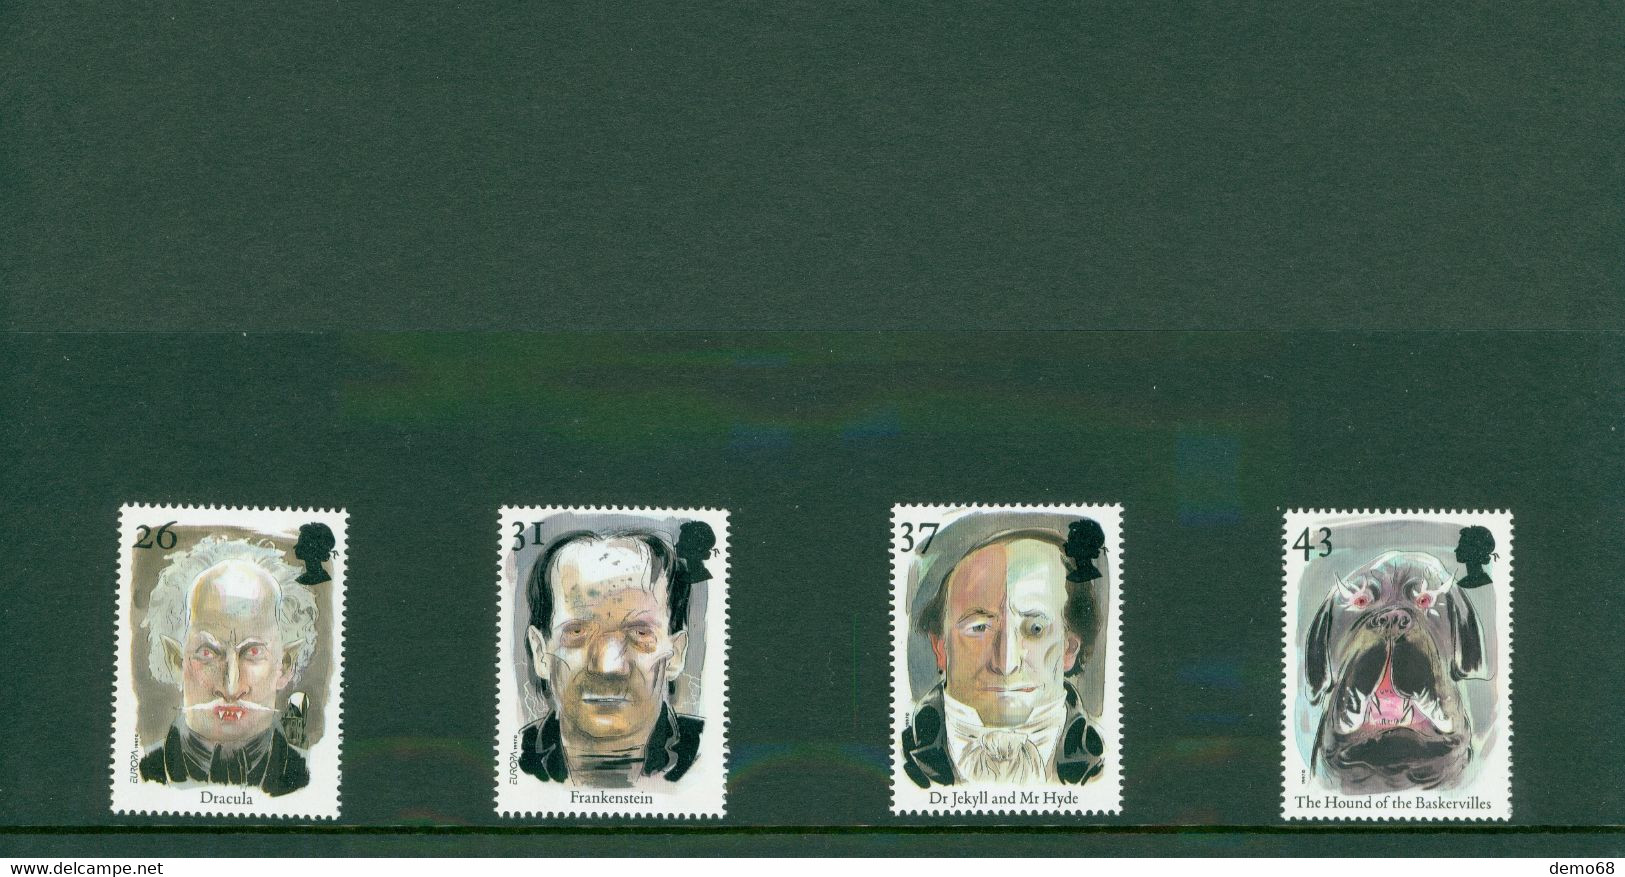 Stamp Timbre England Great Britain British Tales Of Terror Dracula Dr Jeckyll Frankenst. GB New 4 Royal Mail Mint Stamps - Colecciones Completas